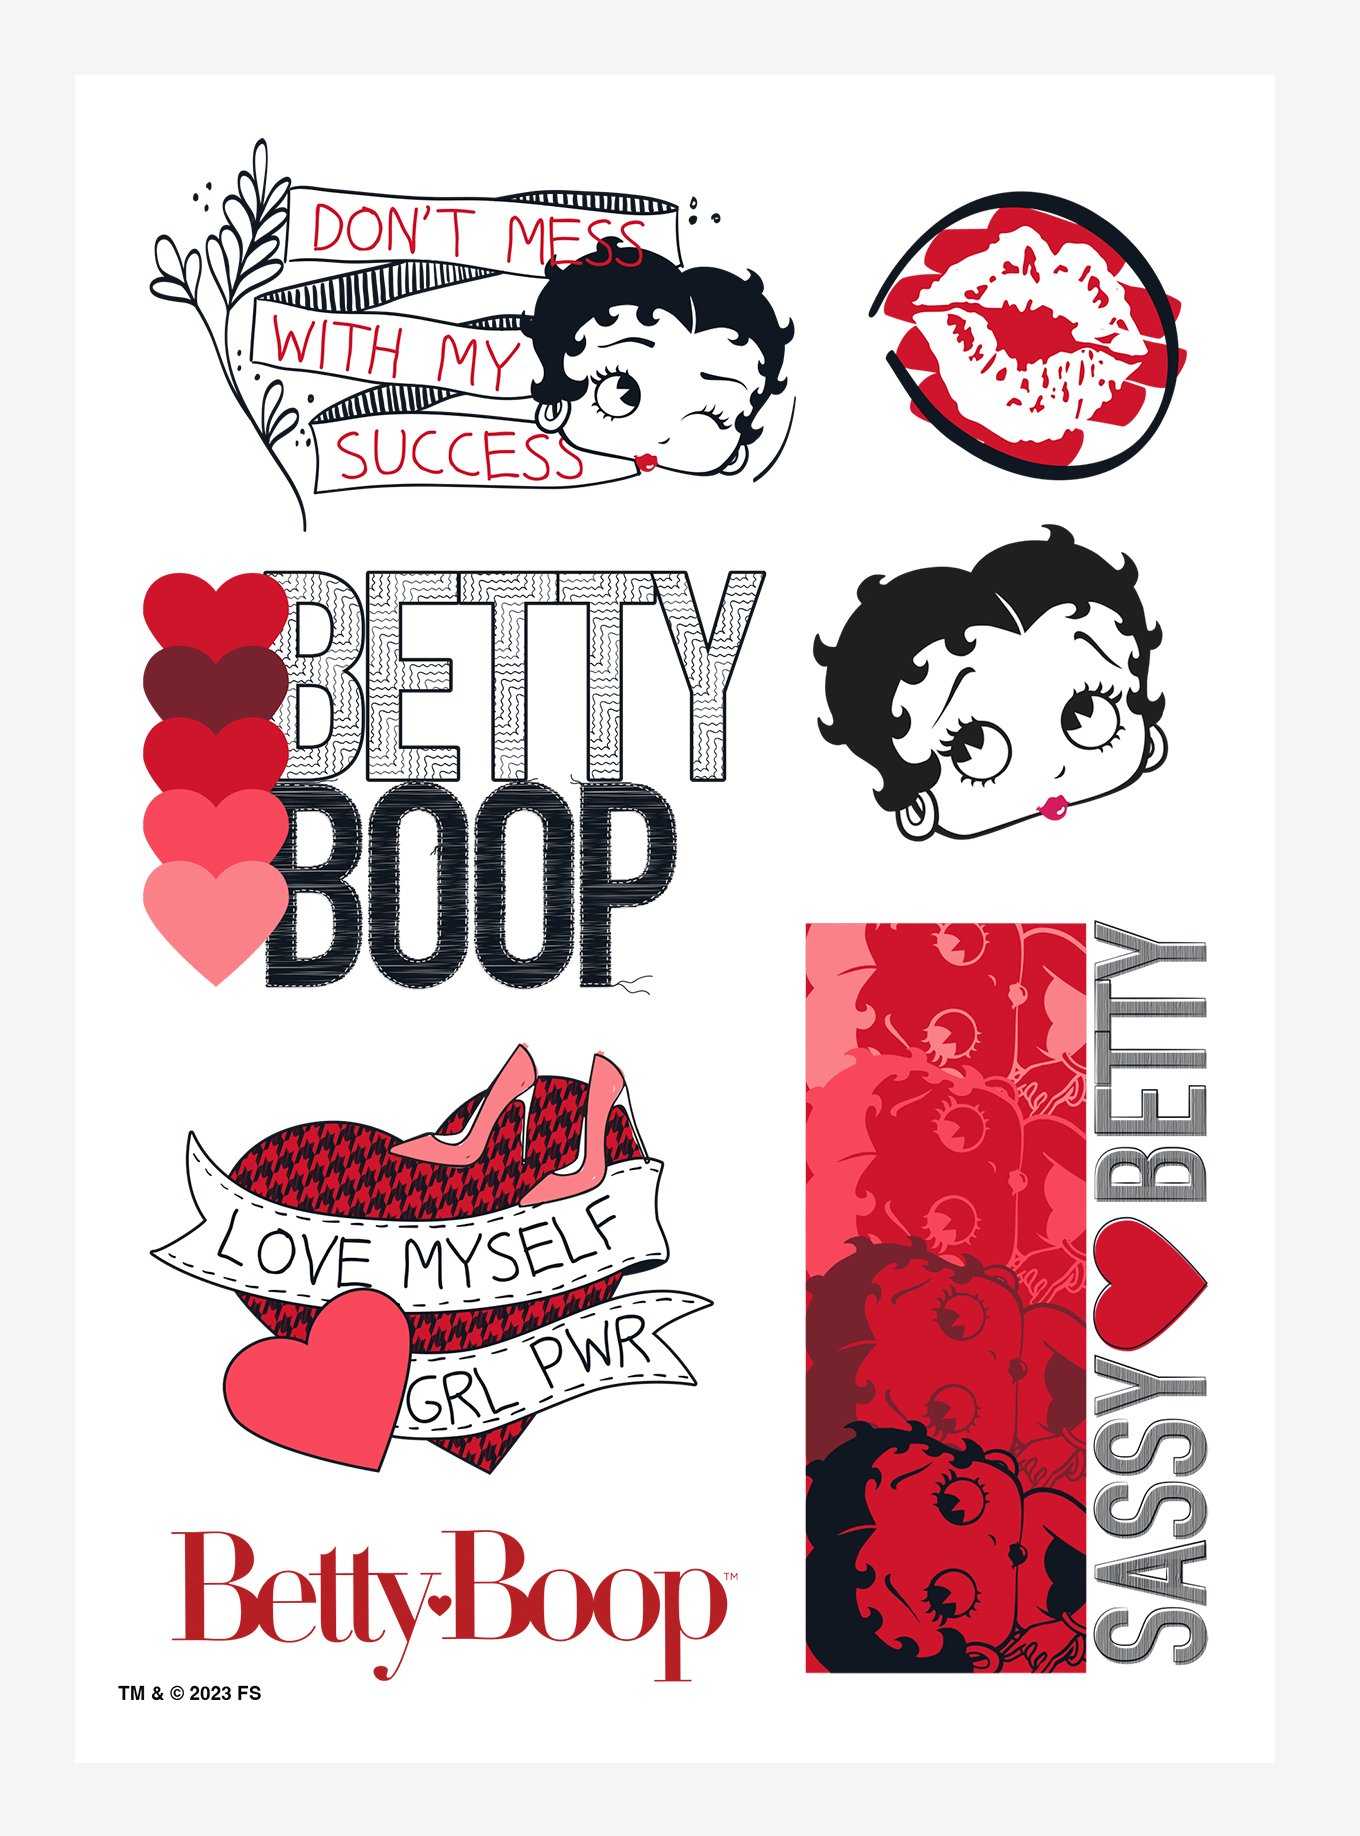 Supernatural Valentine's Day Stickers and Decal Sheets